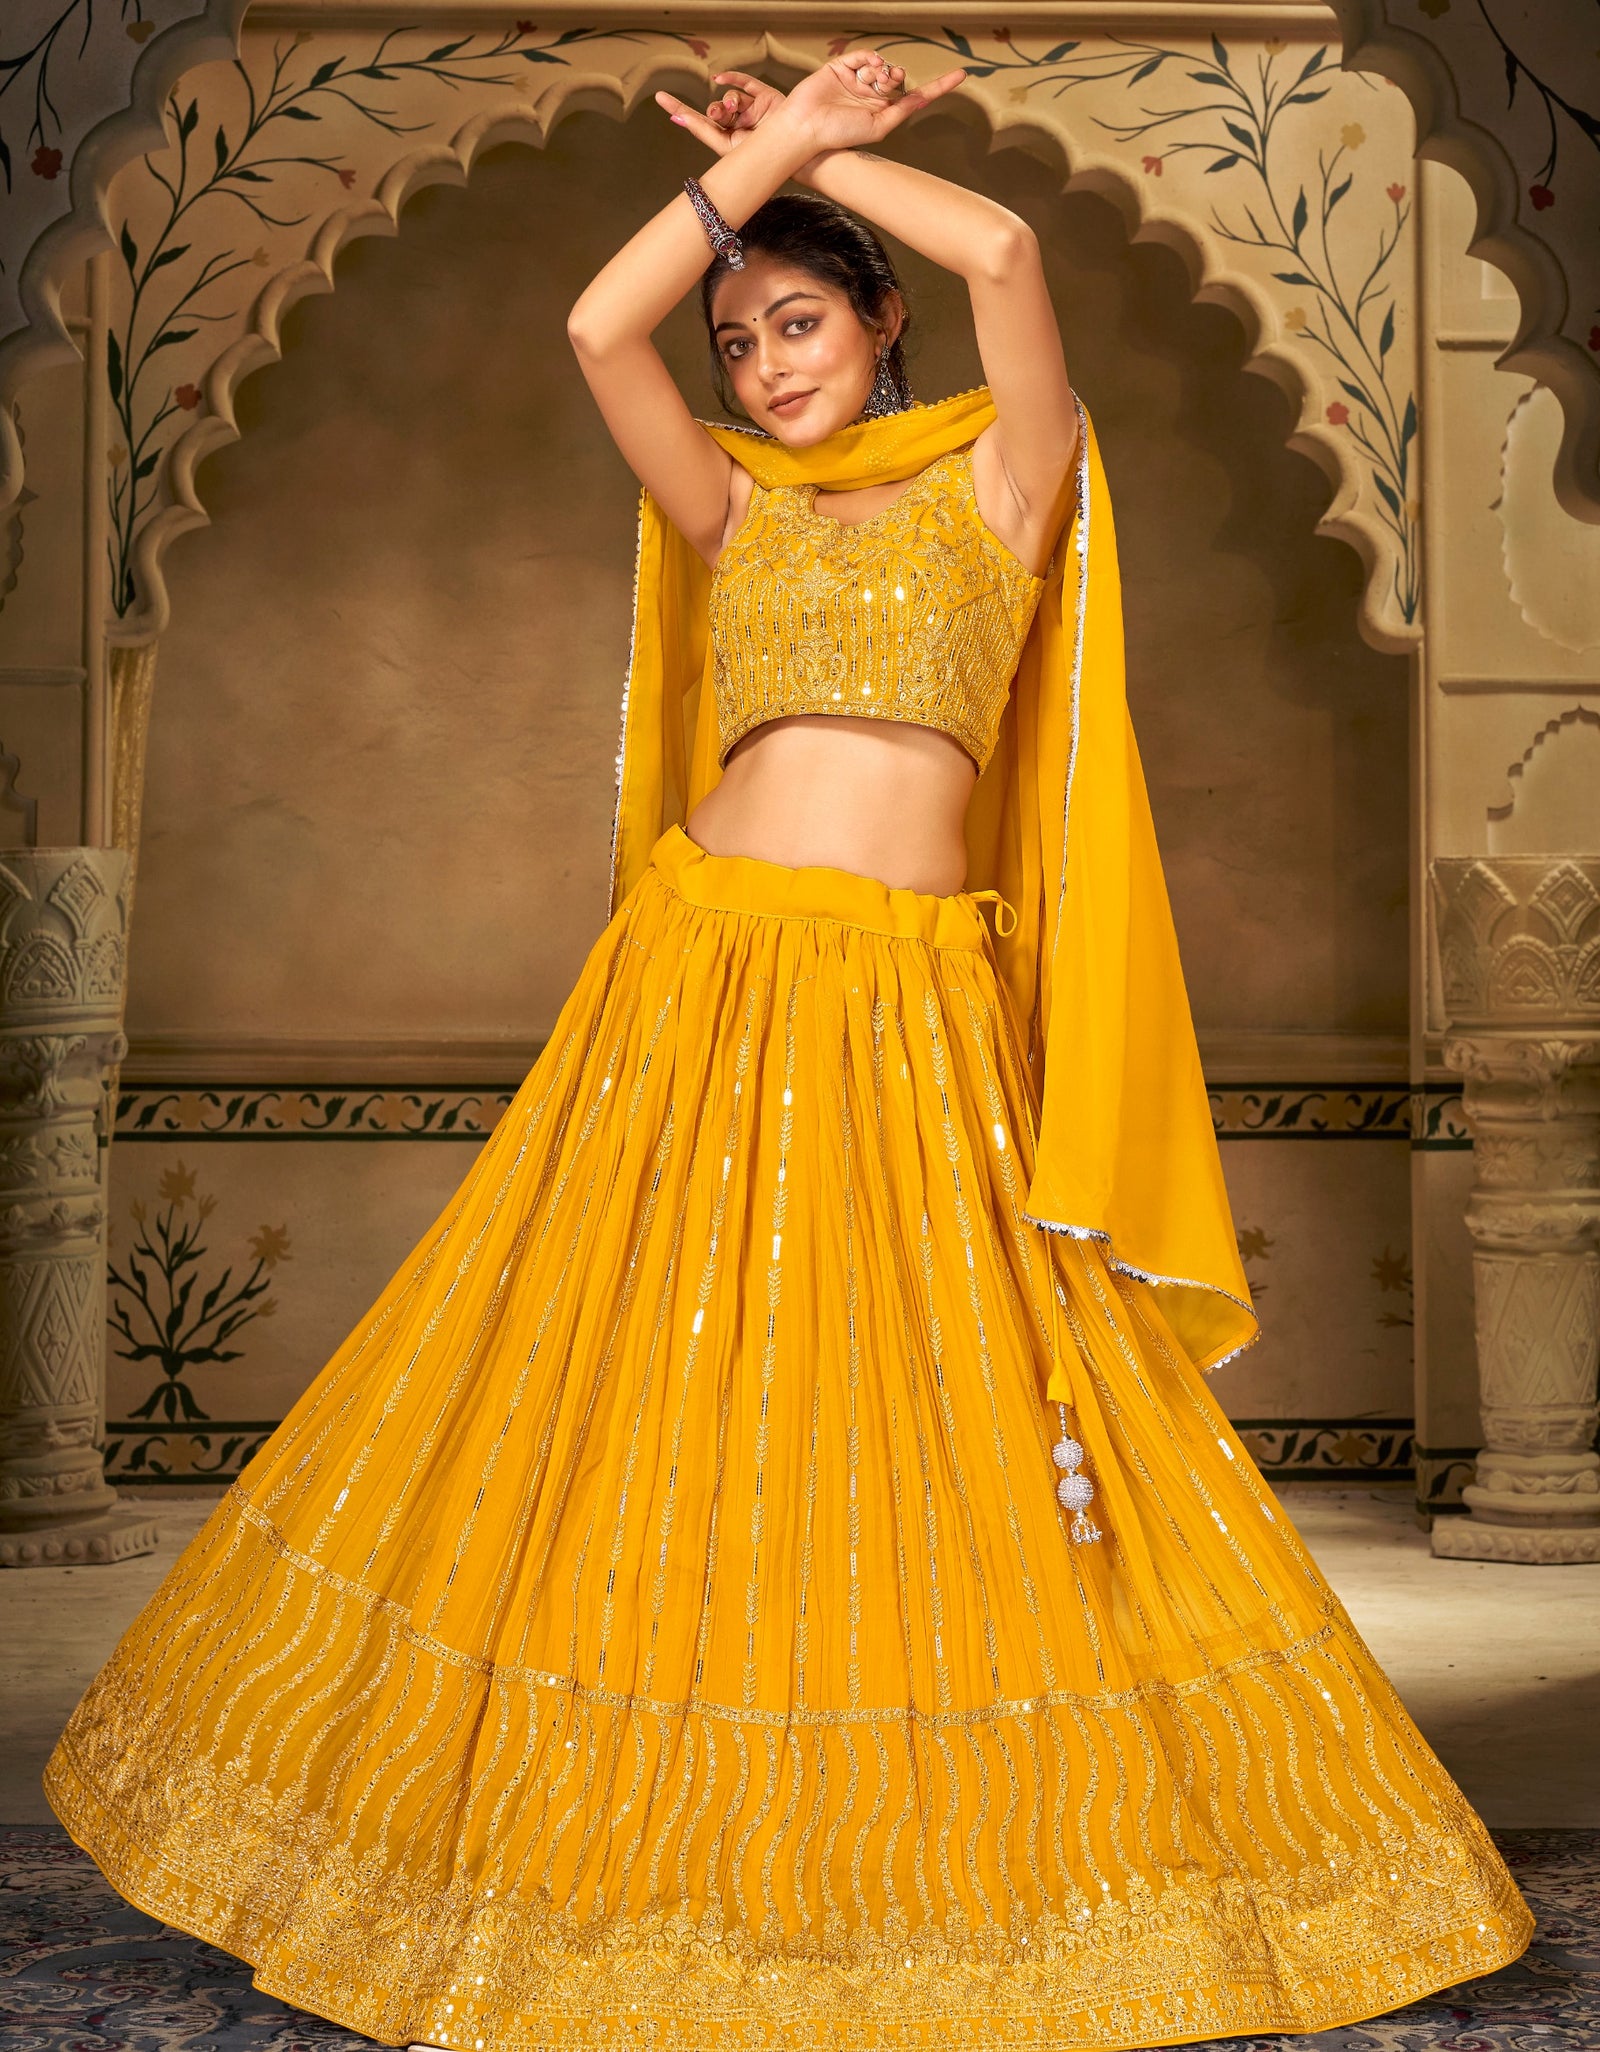 60+ Lehenga Blouse Designs To Browse & Take Inspiration From! | Cold  shoulder blouse designs, Bridal lehenga blouse design, Bridal blouse designs